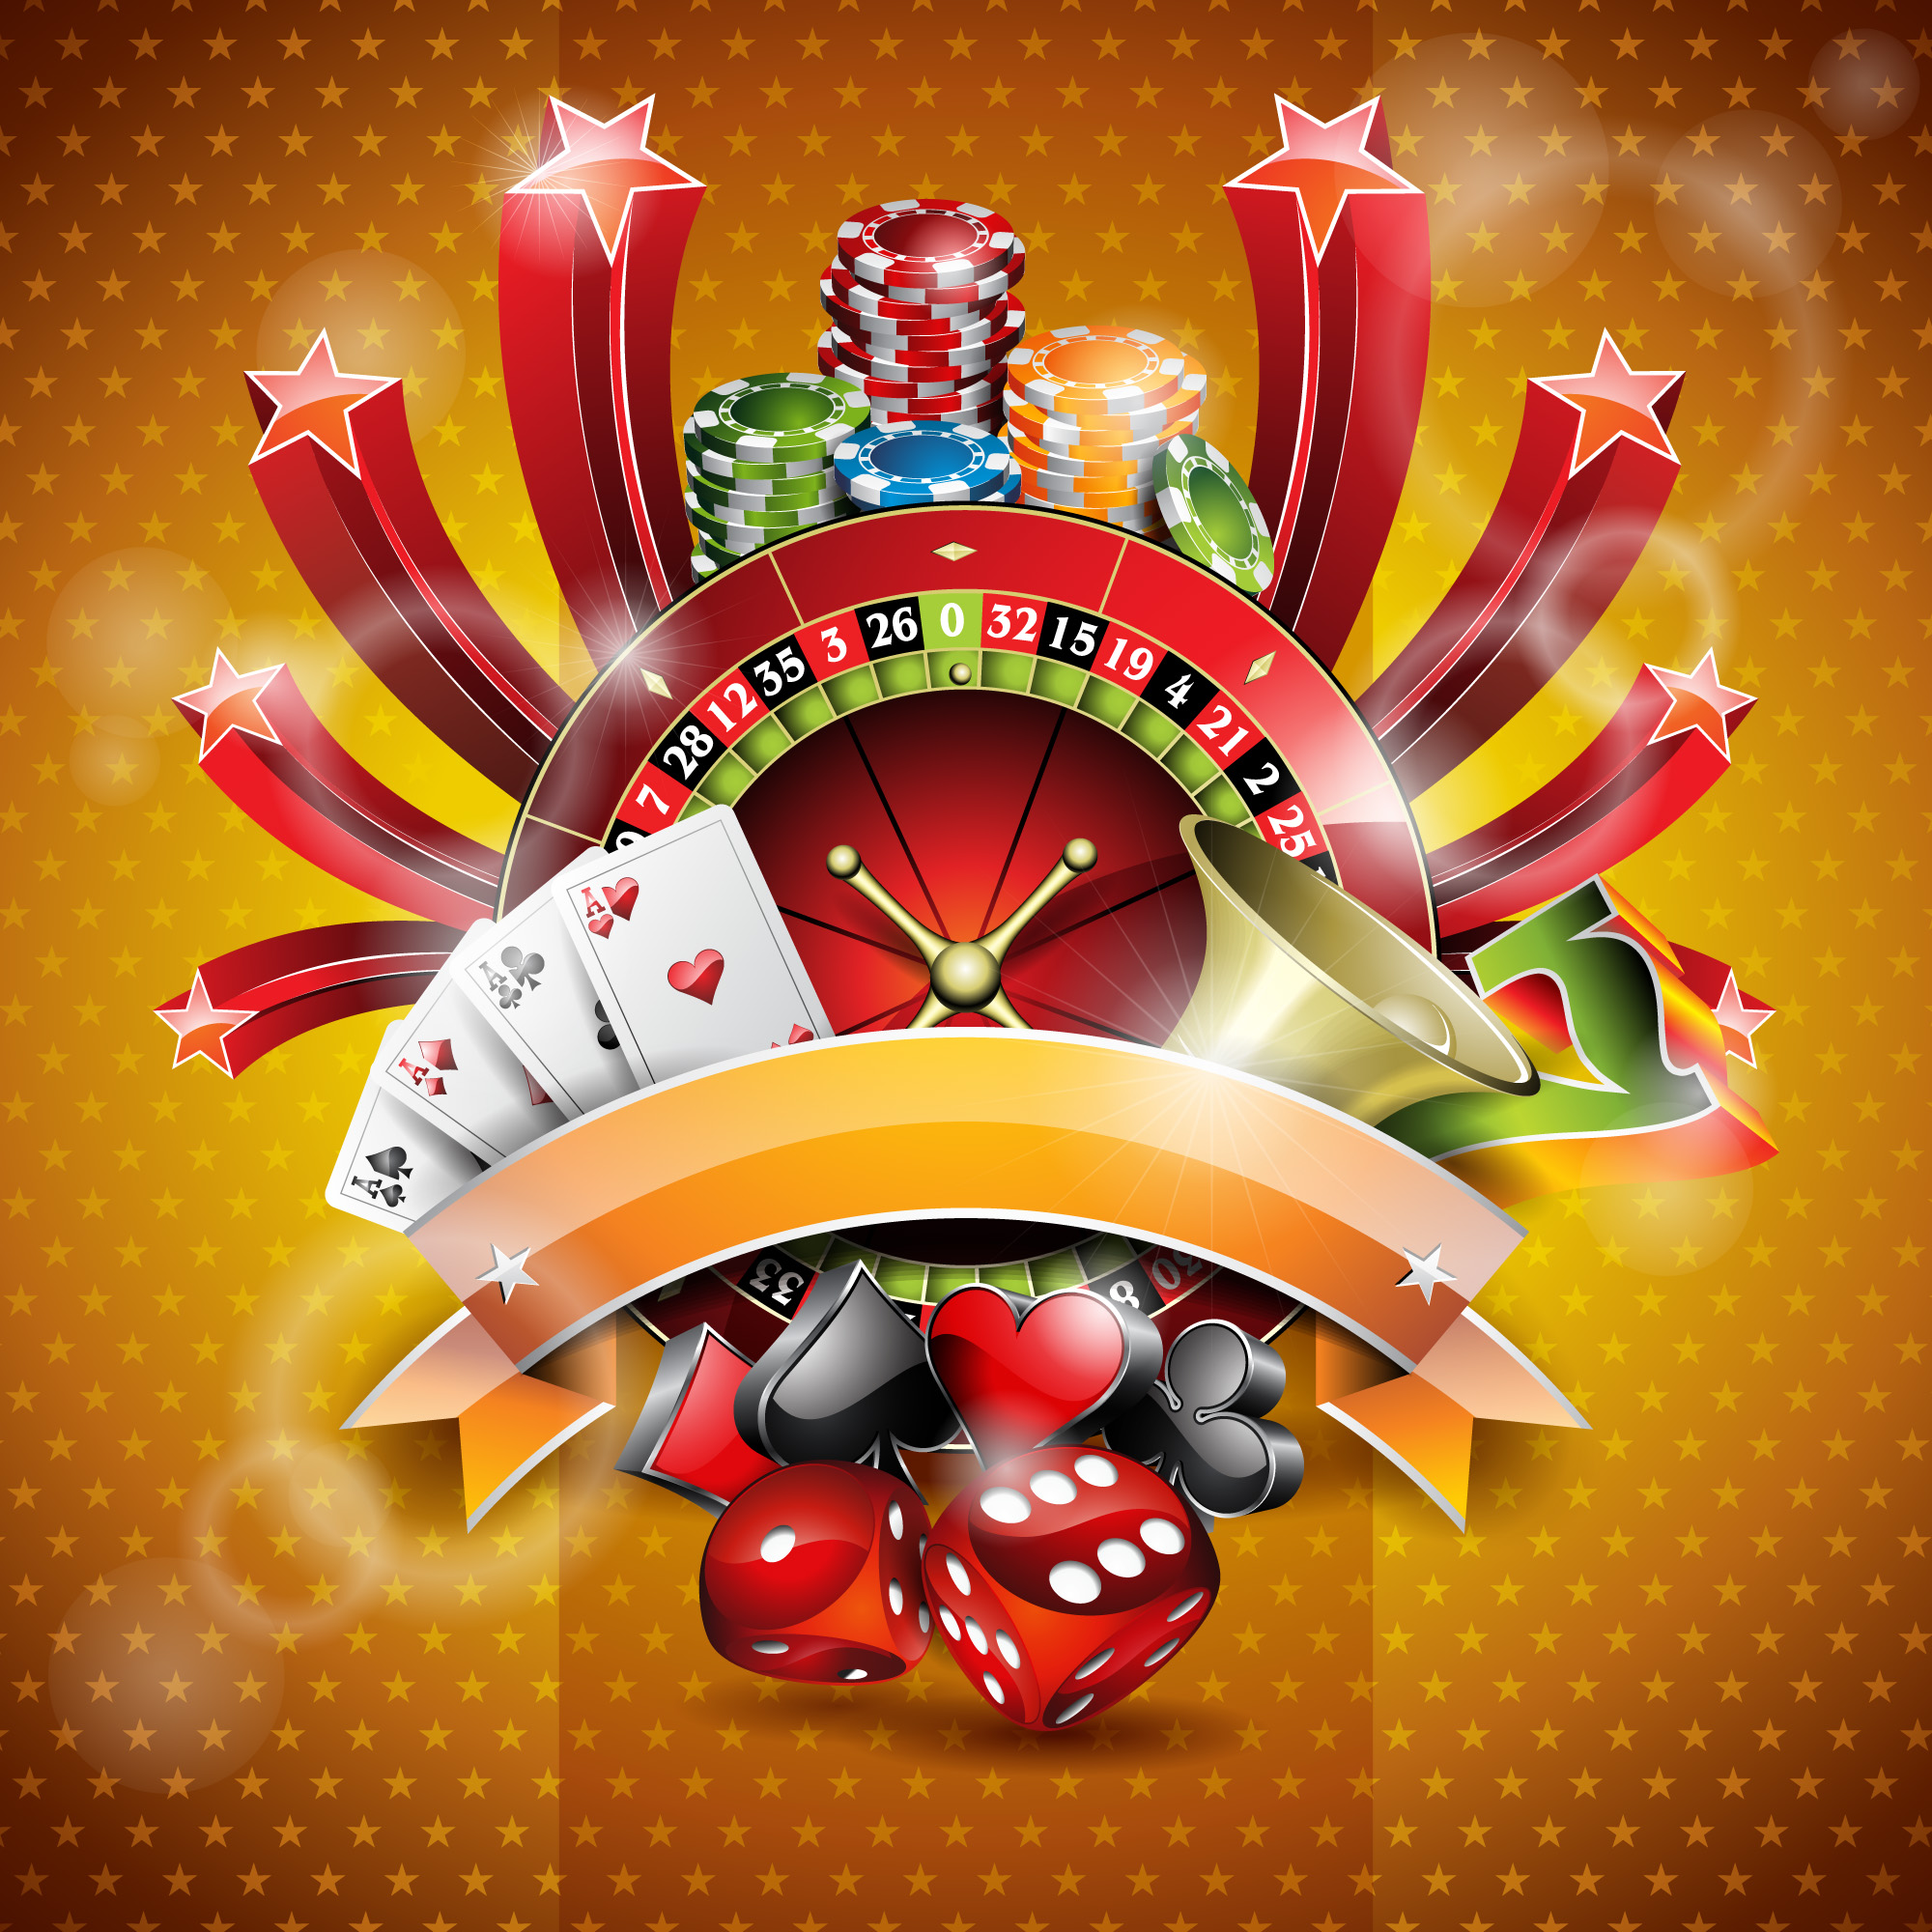 vector-illustration-on-a-casino-theme-with-roulette-wheel-and-ribbon.jpg